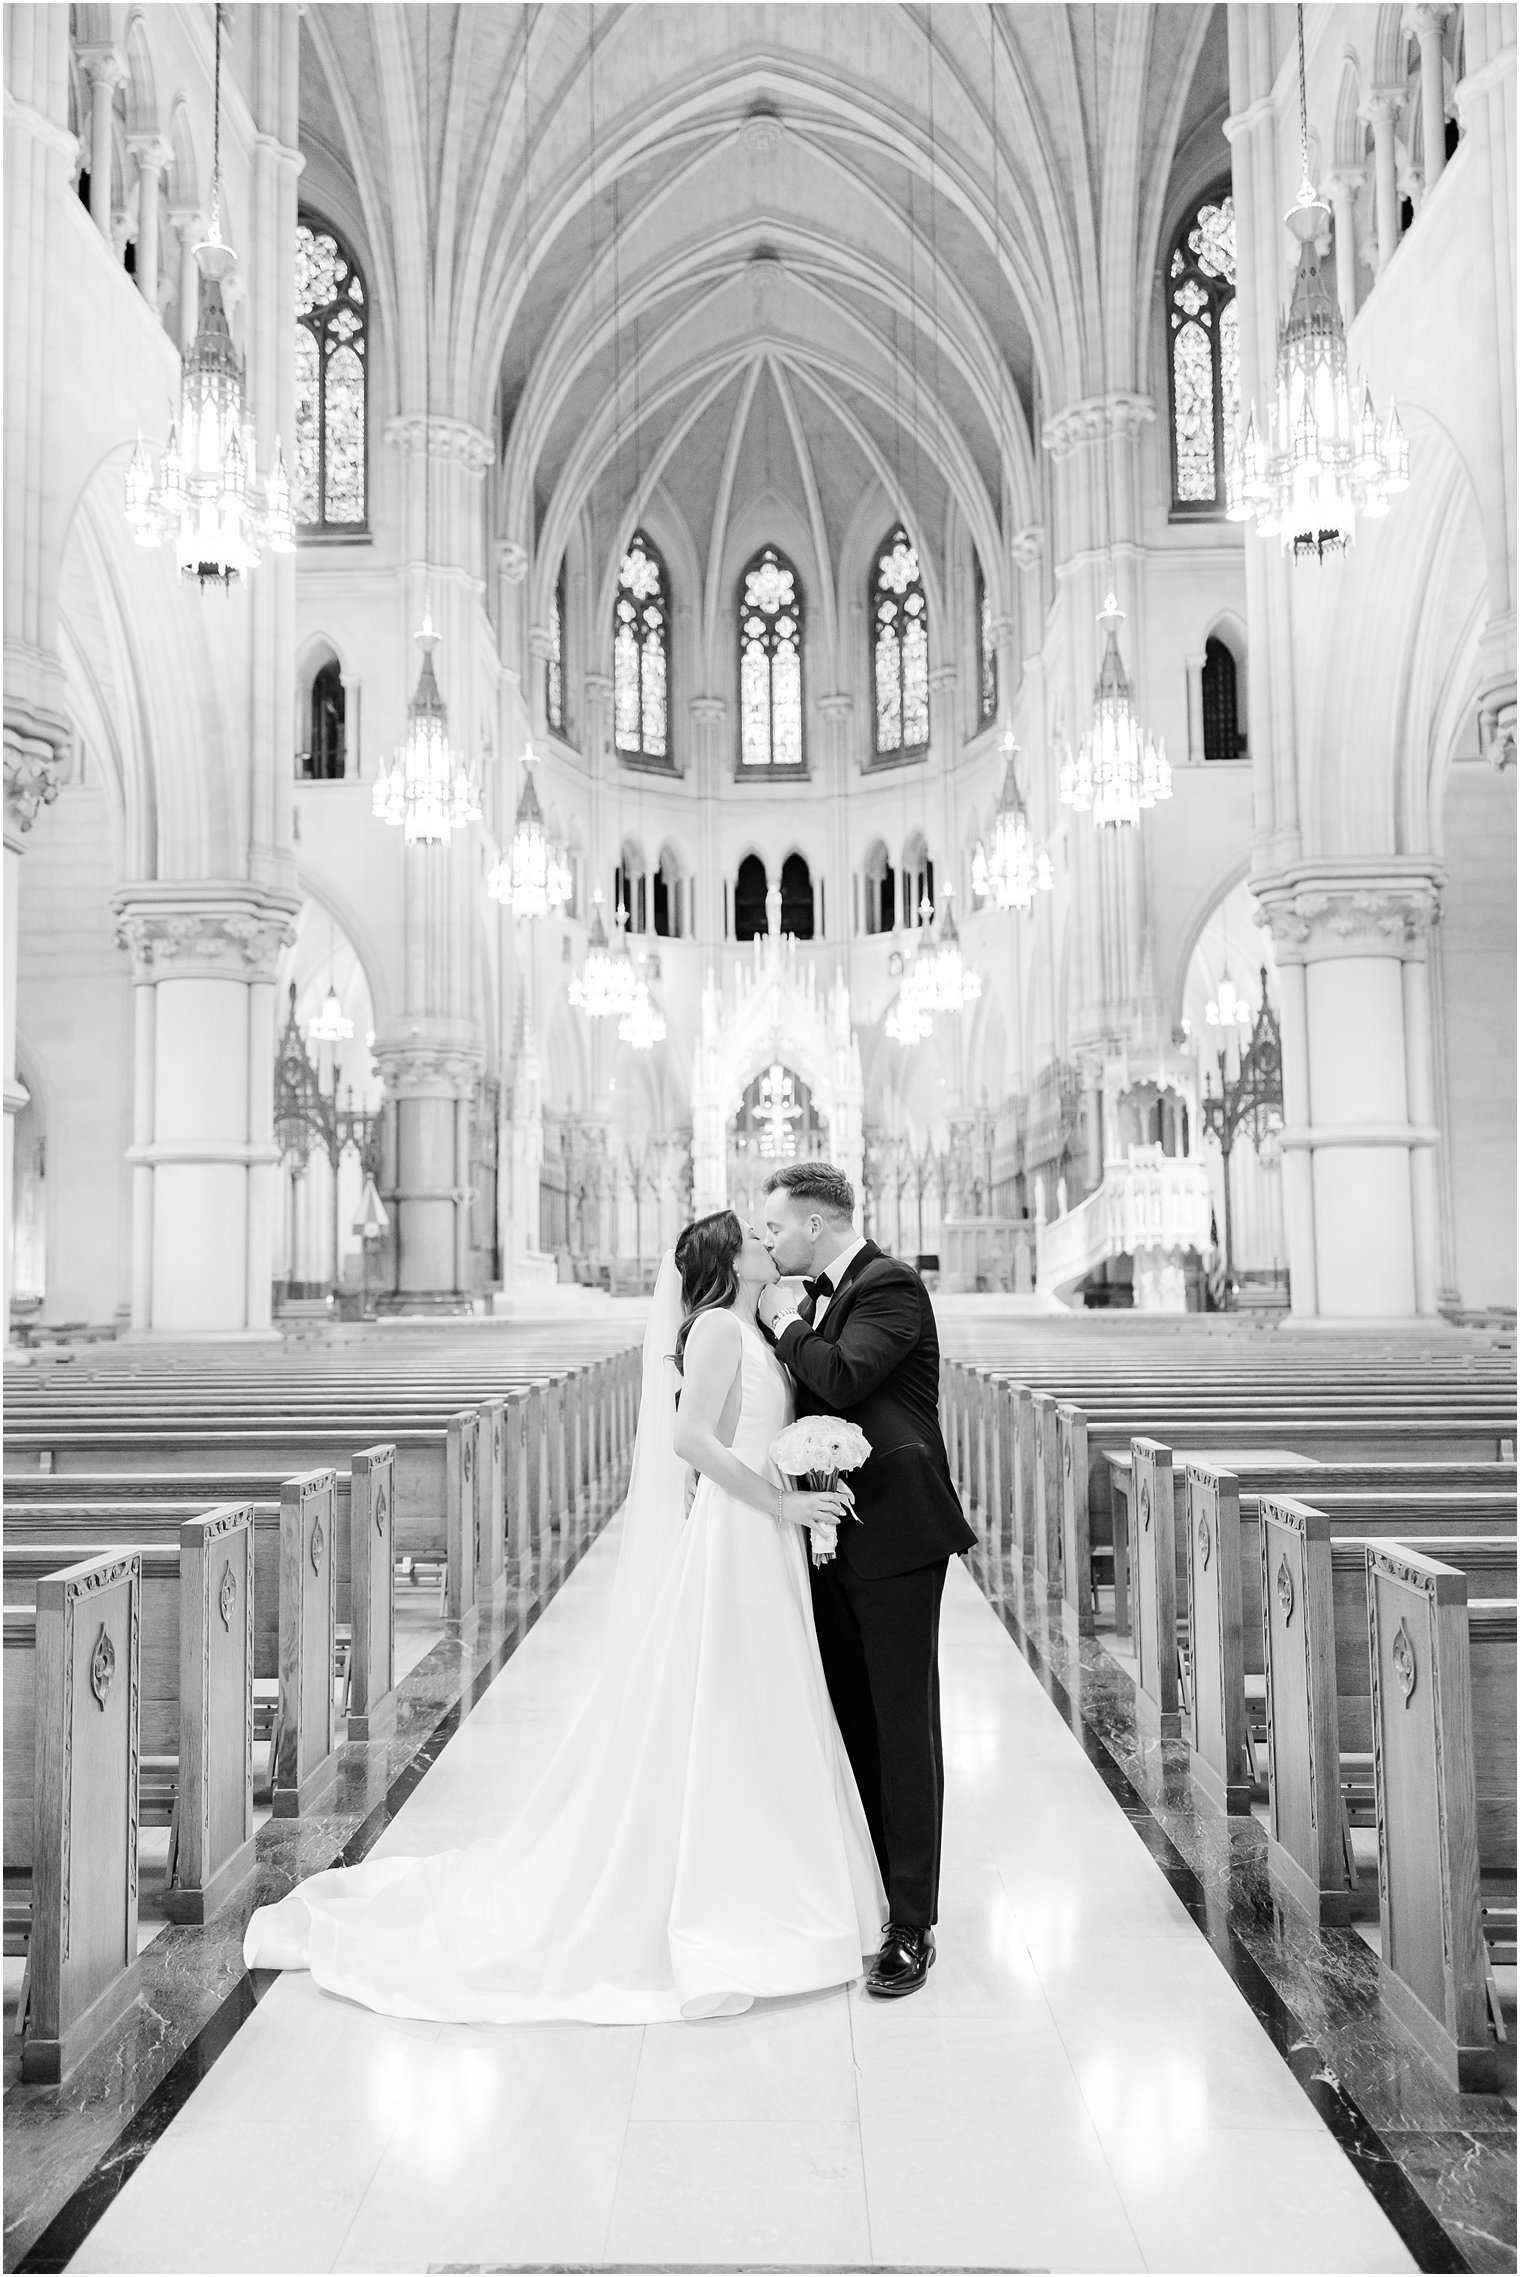 newlyweds kiss during ceremony at The Cathedral Basilica of the Sacred Heart